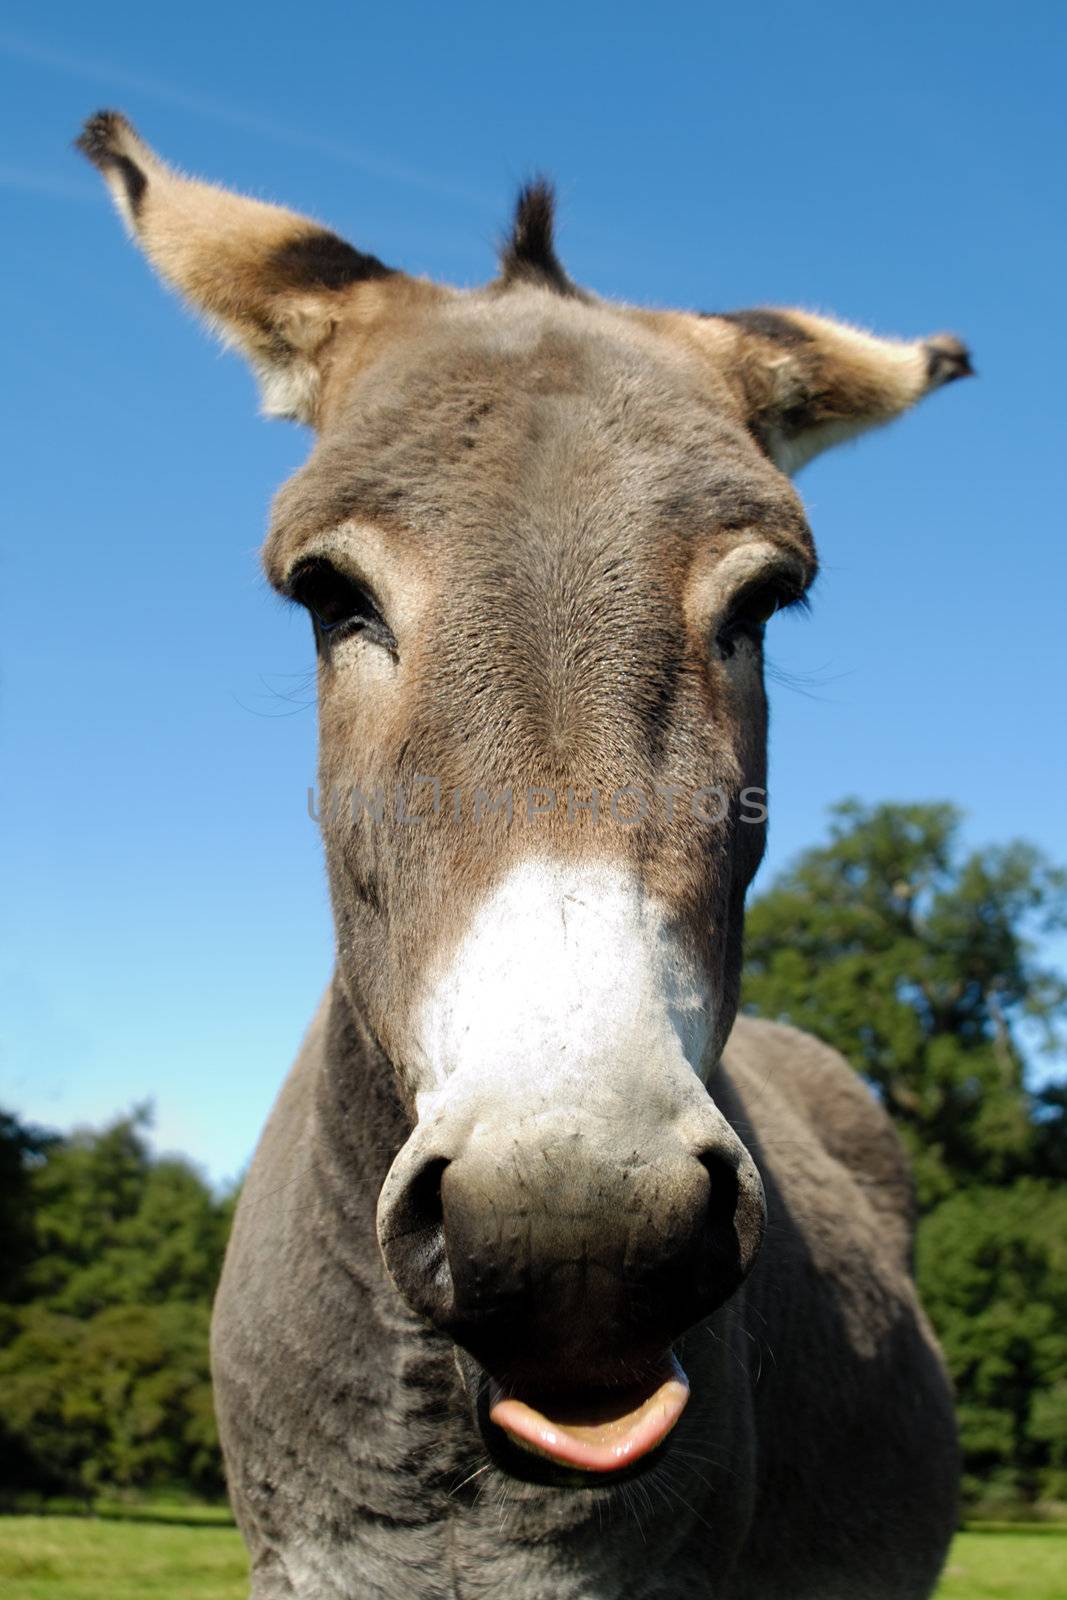 A donkey shows tongue. It is standing on green grass.